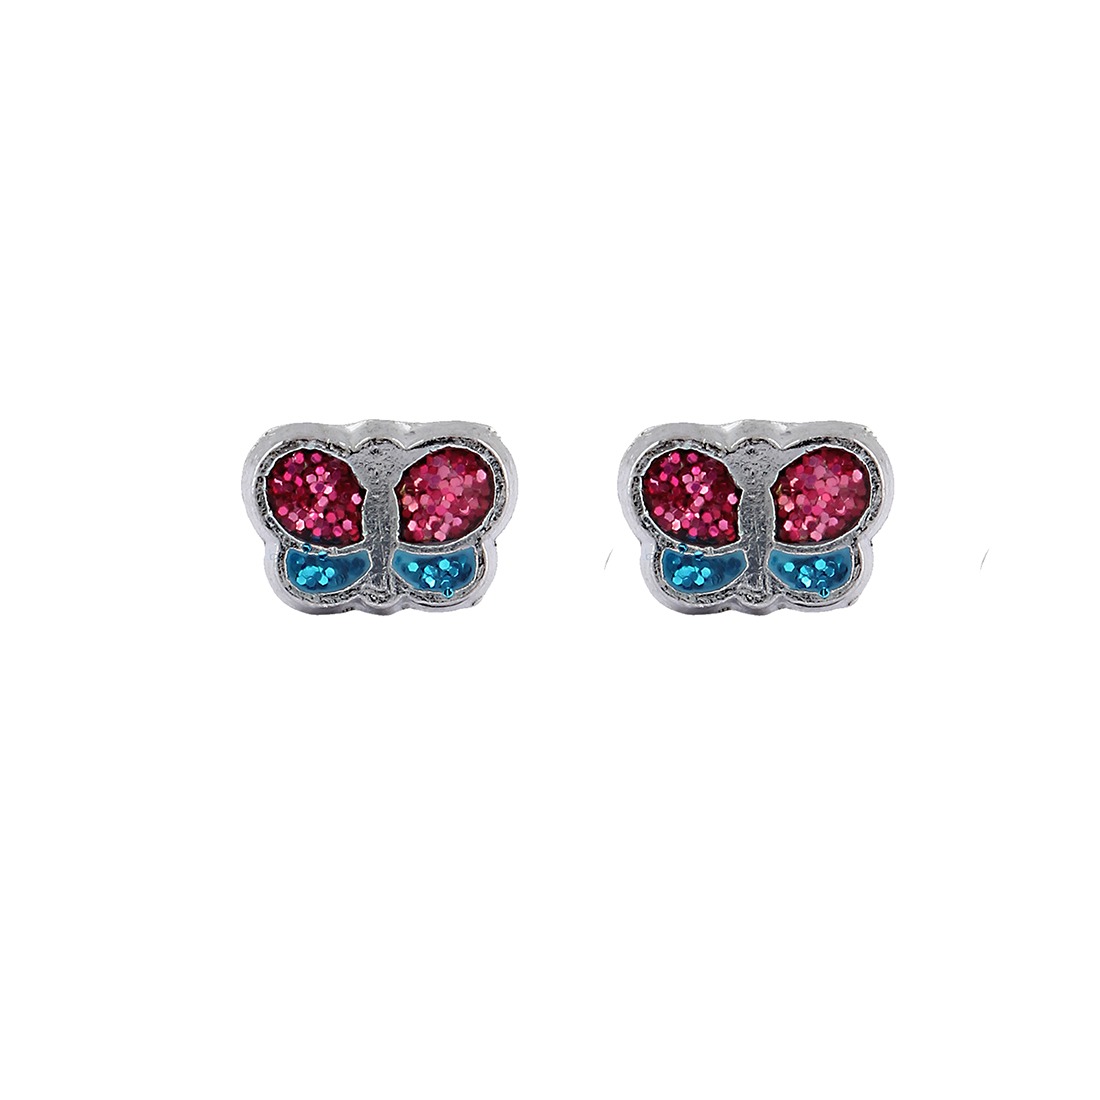 Turquoise - Butterfly Pink Glitter | 24K Stainless Steel Kids / Baby / Children’s Fashion Earrings | Studex Tiny Tips